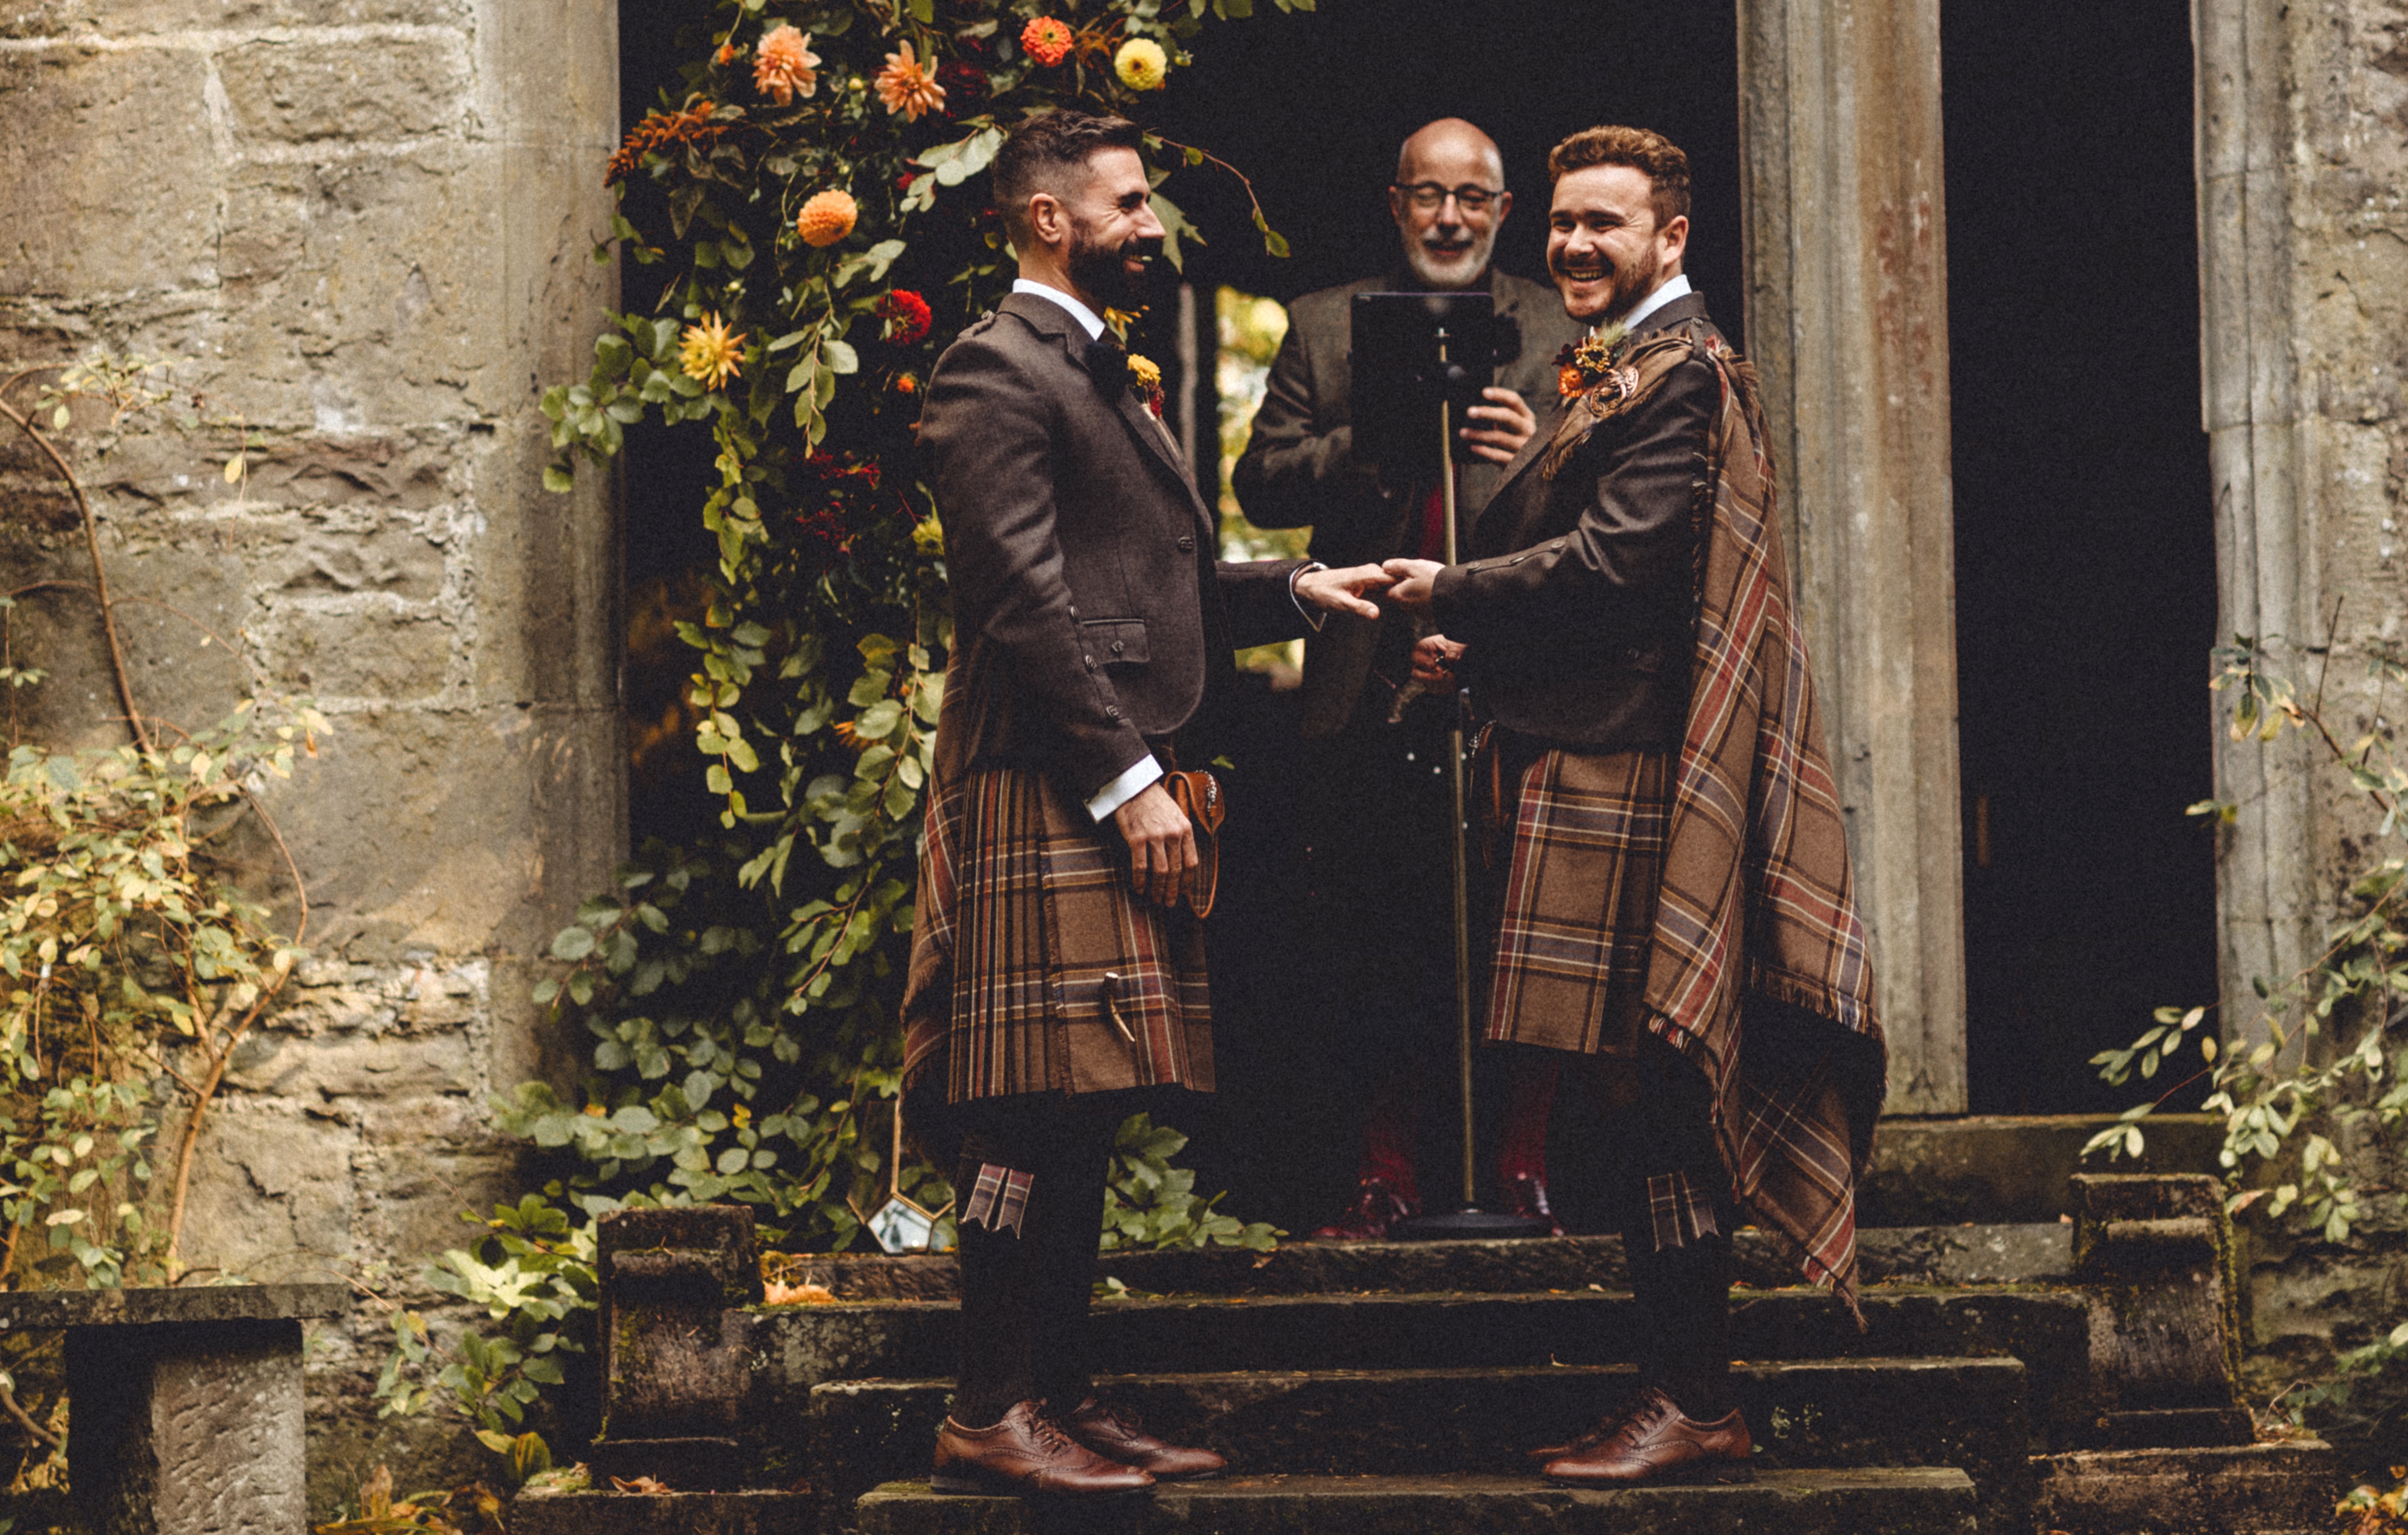 Kevin and Gavin tying the knot in kilts